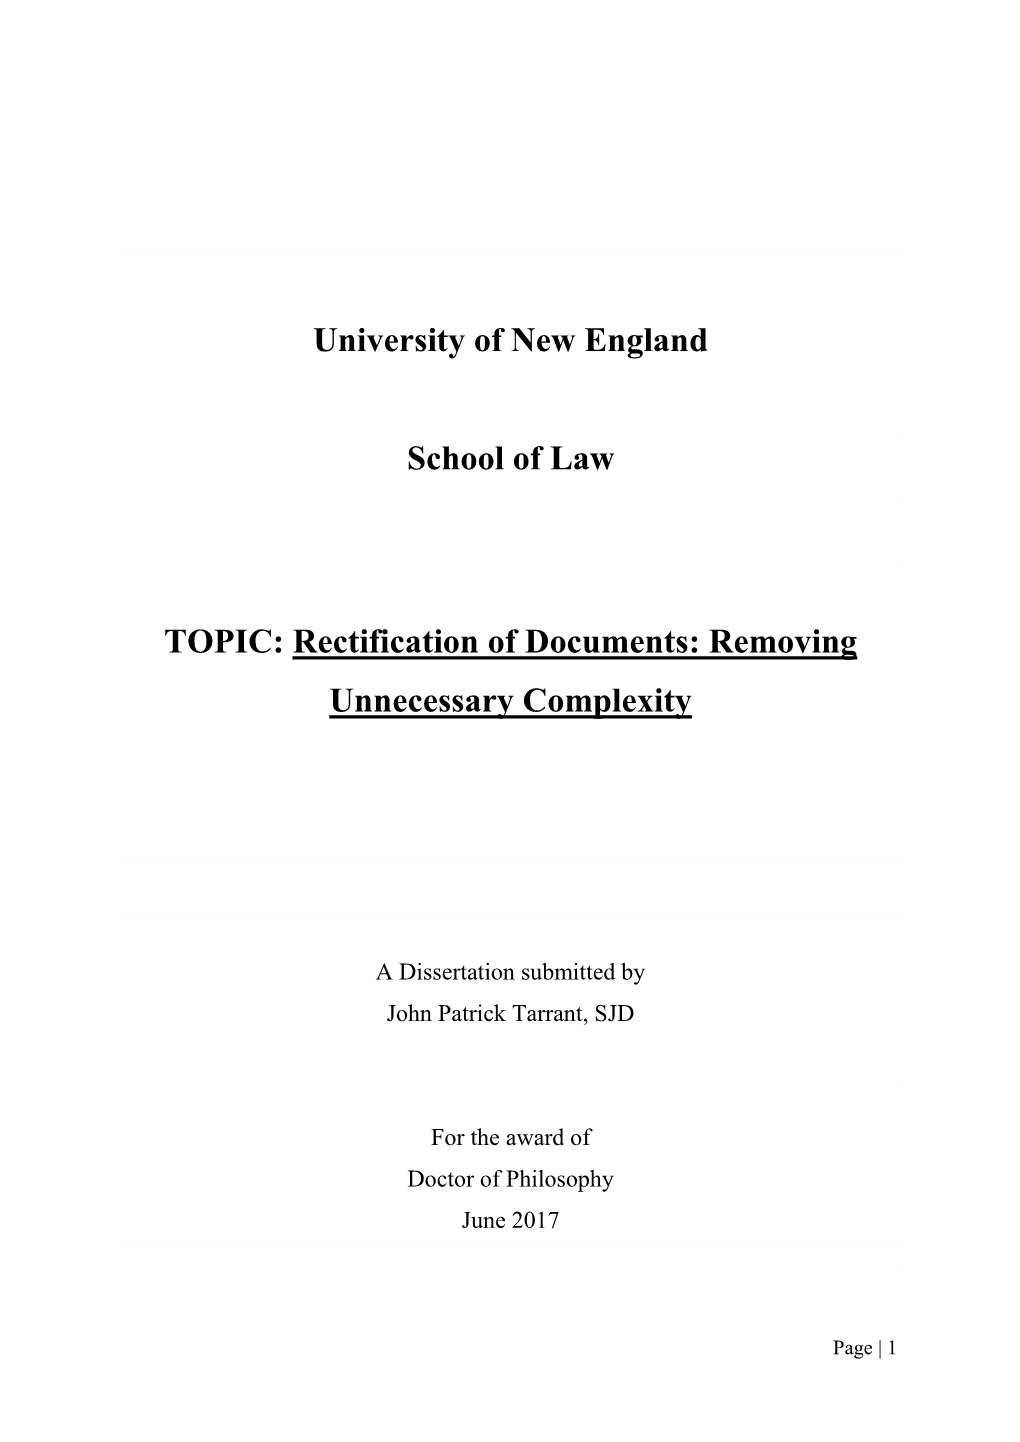 Rectification of Documents: Removing Unnecessary Complexity